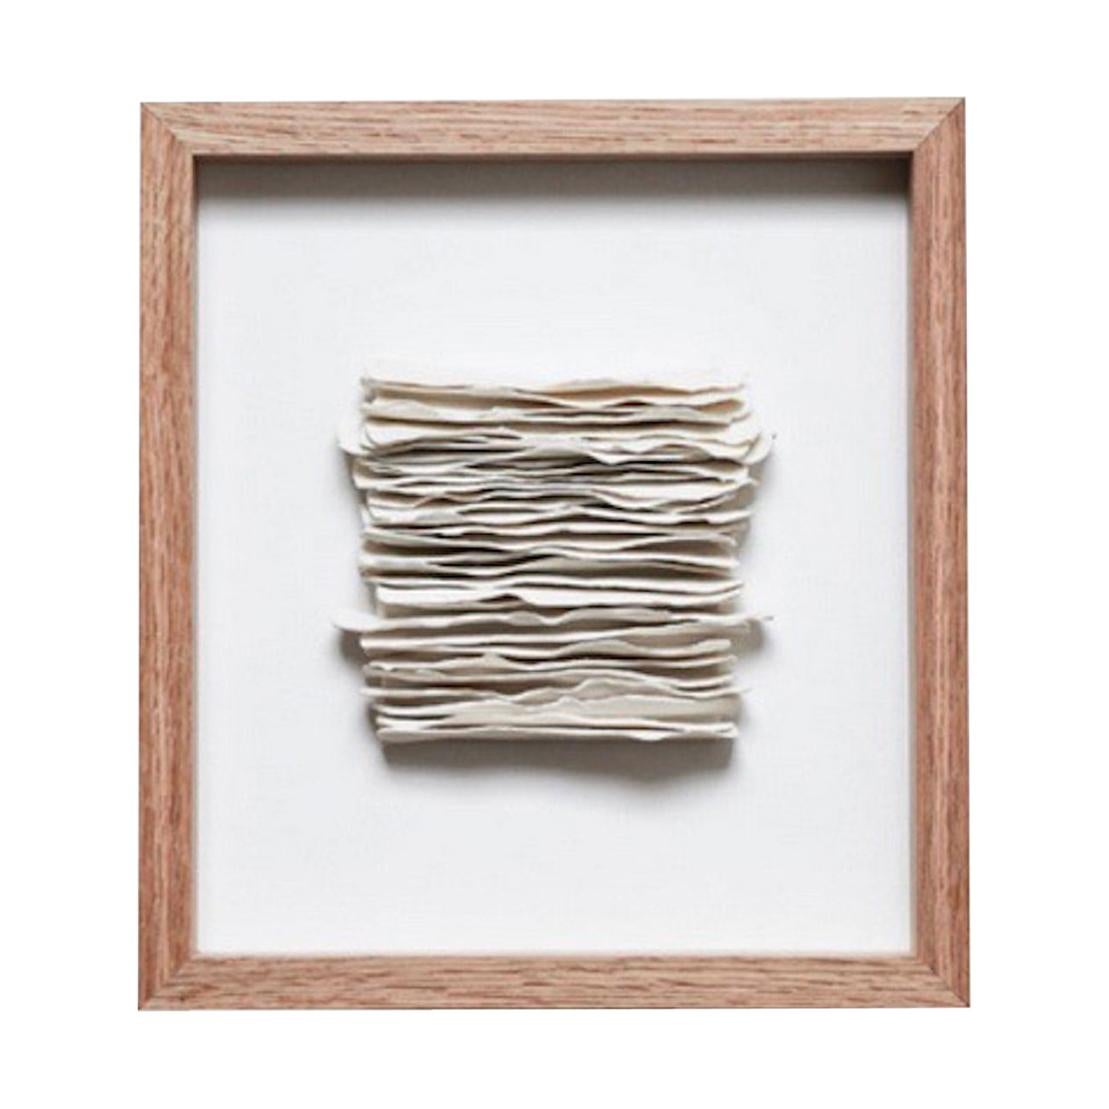 White Textured Porcelain Strips in Frame, France, Contemporary